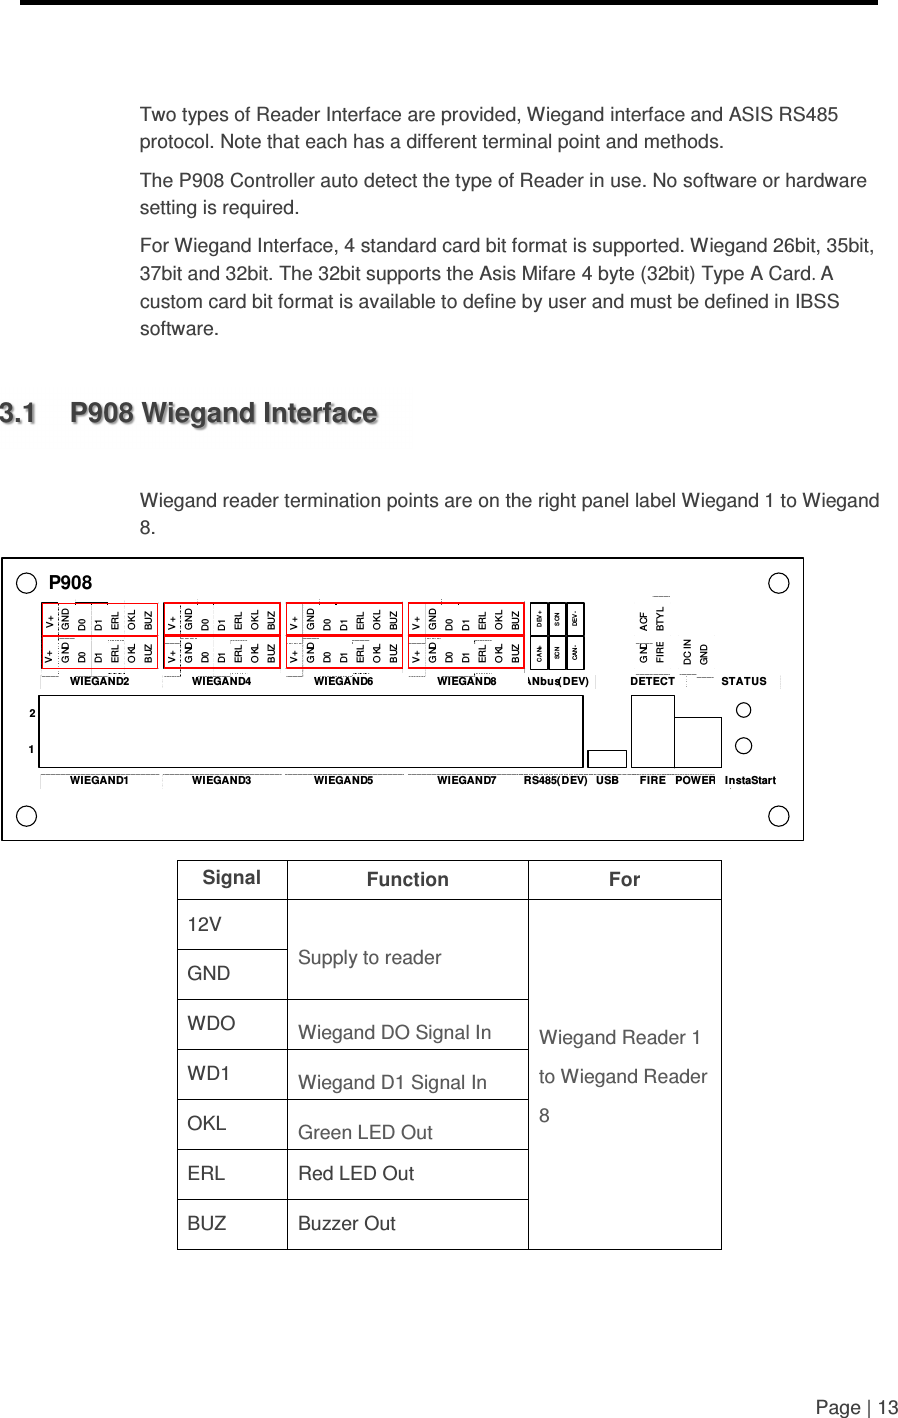     Page | 13    Two types of Reader Interface are provided, Wiegand interface and ASIS RS485 protocol. Note that each has a different terminal point and methods.  The P908 Controller auto detect the type of Reader in use. No software or hardware setting is required.  For Wiegand Interface, 4 standard card bit format is supported. Wiegand 26bit, 35bit, 37bit and 32bit. The 32bit supports the Asis Mifare 4 byte (32bit) Type A Card. A custom card bit format is available to define by user and must be defined in IBSS software.  3.1  P908 Wiegand Interface  Wiegand reader termination points are on the right panel label Wiegand 1 to Wiegand 8. P90821WIEGAND1 WIEGAND3 WIEGAND5 WIEGAND7 USBCANbus(DEV)RS485(DEV) POWERFIREDETECT STATUSInstaStartWIEGAND2 WIEGAND4 WIEGAND6 WIEGAND8FIREGNDBTYLACFGNDDC INGNDD0D1ERLOKLBUZV+GNDD0D1ERLOKLBUZV+GNDD0D1ERLOKLBUZV+GNDD0D1ERLOKLBUZV+GNDD0D1ERLOKLBUZV+GNDD0D1ERLOKLBUZV+GNDD0D1ERLOKLBUZV+GNDD0D1ERLOKLBUZV+DEV +S CNDE V -CA N+SCNCAN- Signal  Function  For 12V Supply to reader Wiegand Reader 1 to Wiegand Reader 8 GND WDO  Wiegand DO Signal In WD1  Wiegand D1 Signal In OKL  Green LED Out ERL  Red LED Out BUZ  Buzzer Out    